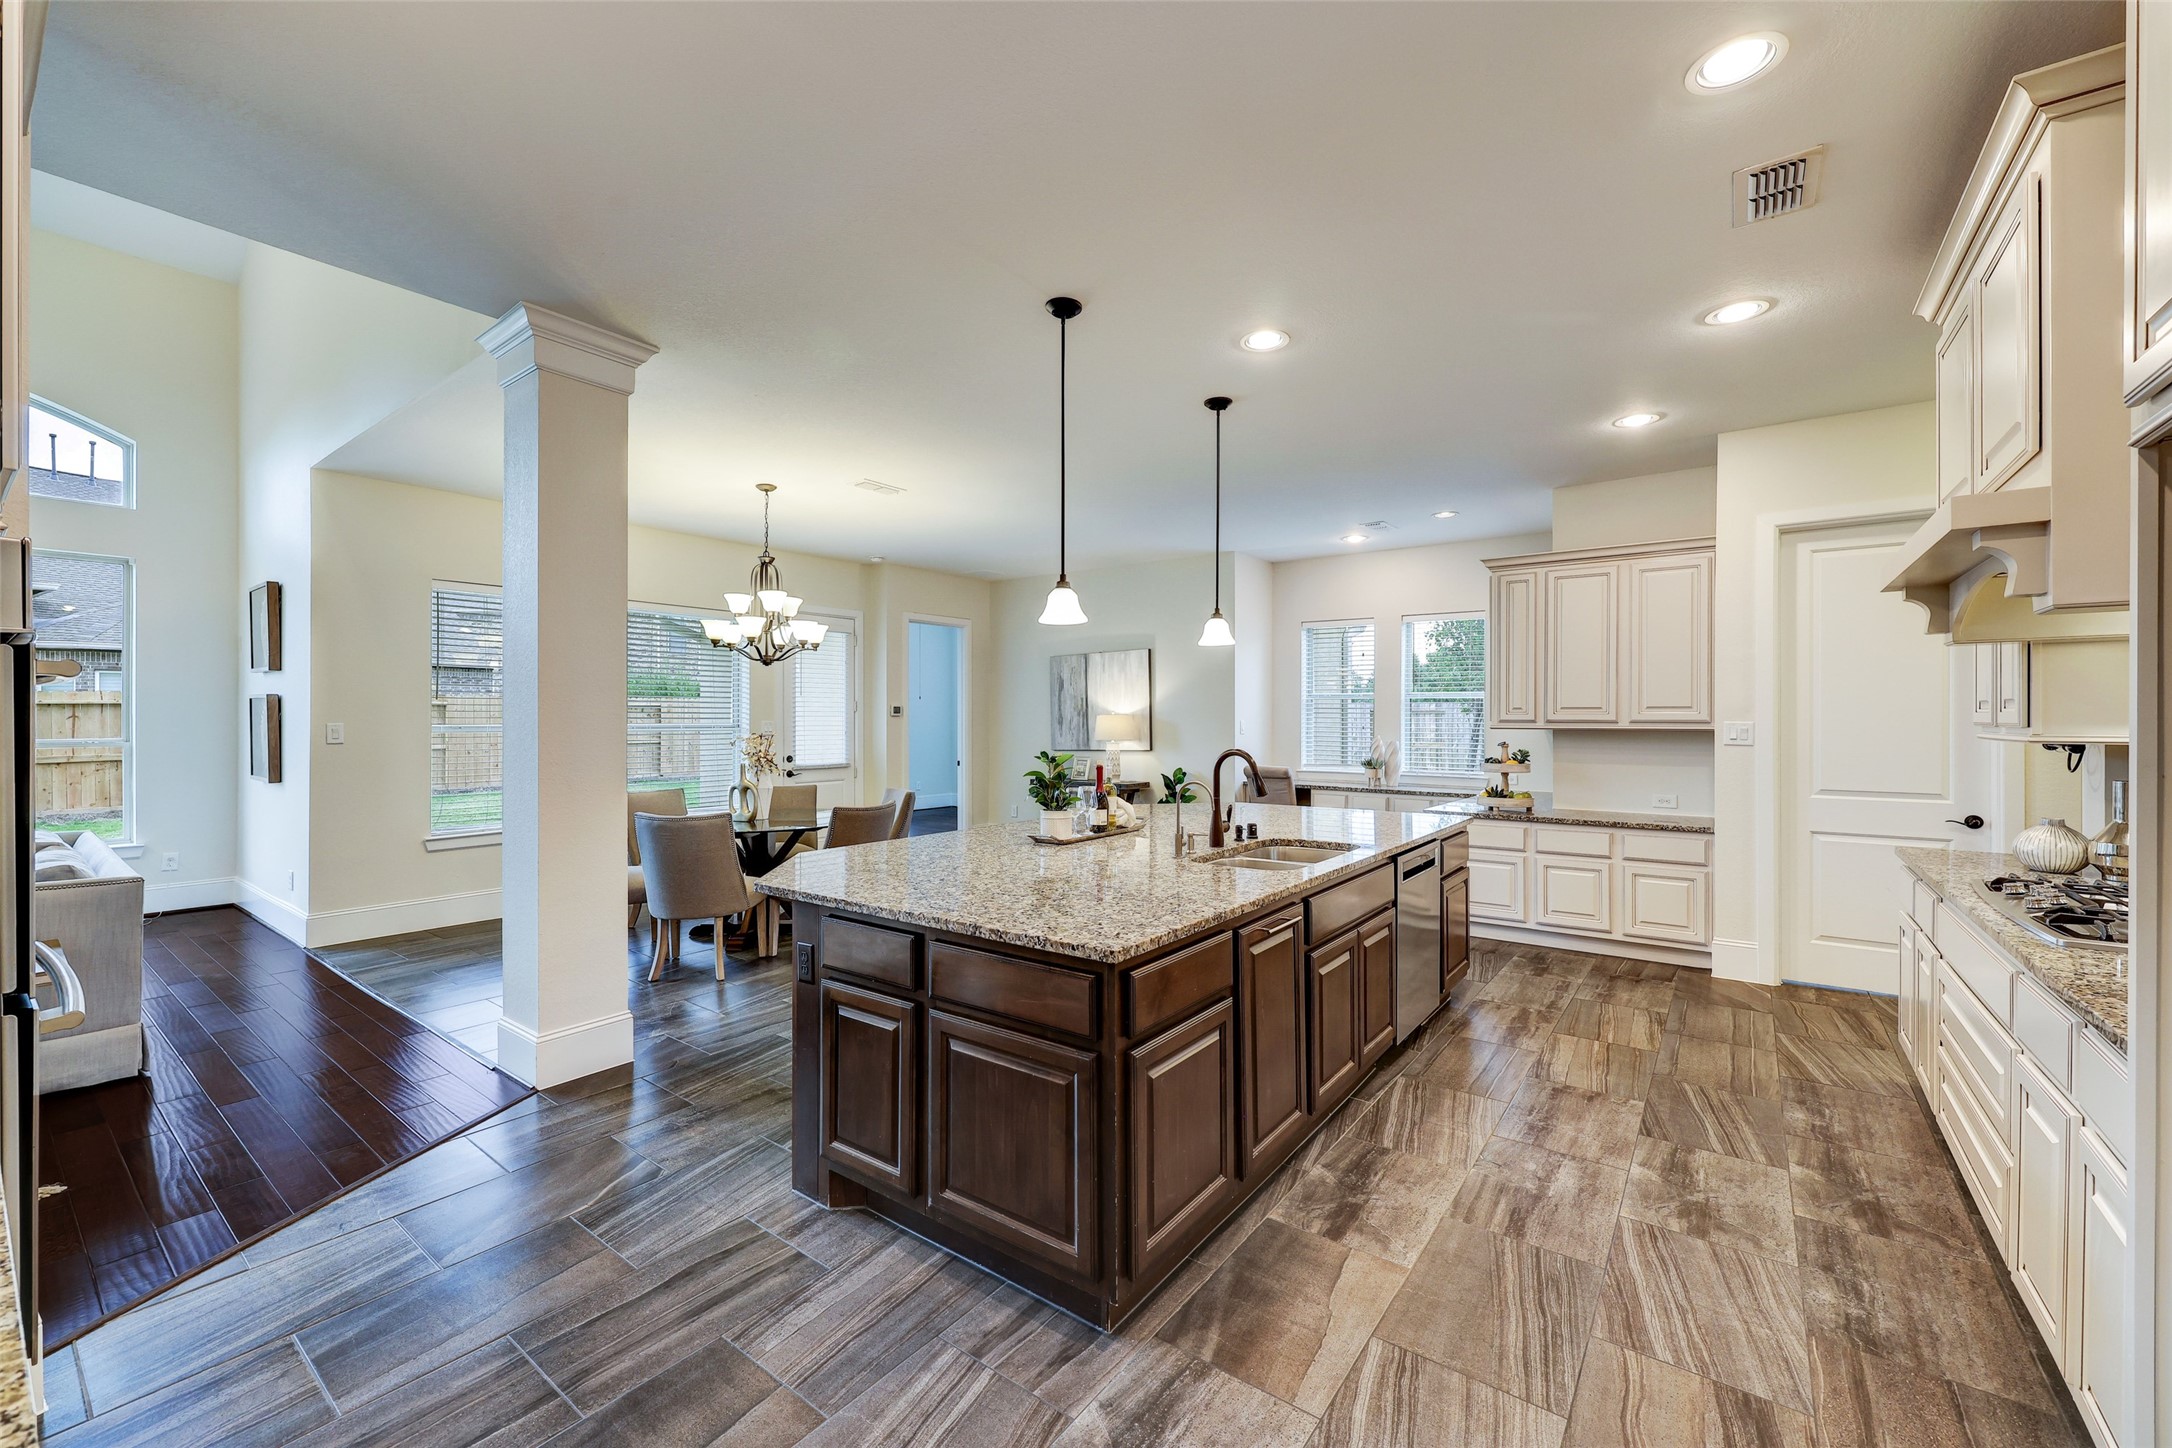 Efficiency is maximized in this gourmet island kitchen with ample cabinetry and countertop space. Open to the breakfast room and family room, this space is well appointed for entertaining guests.